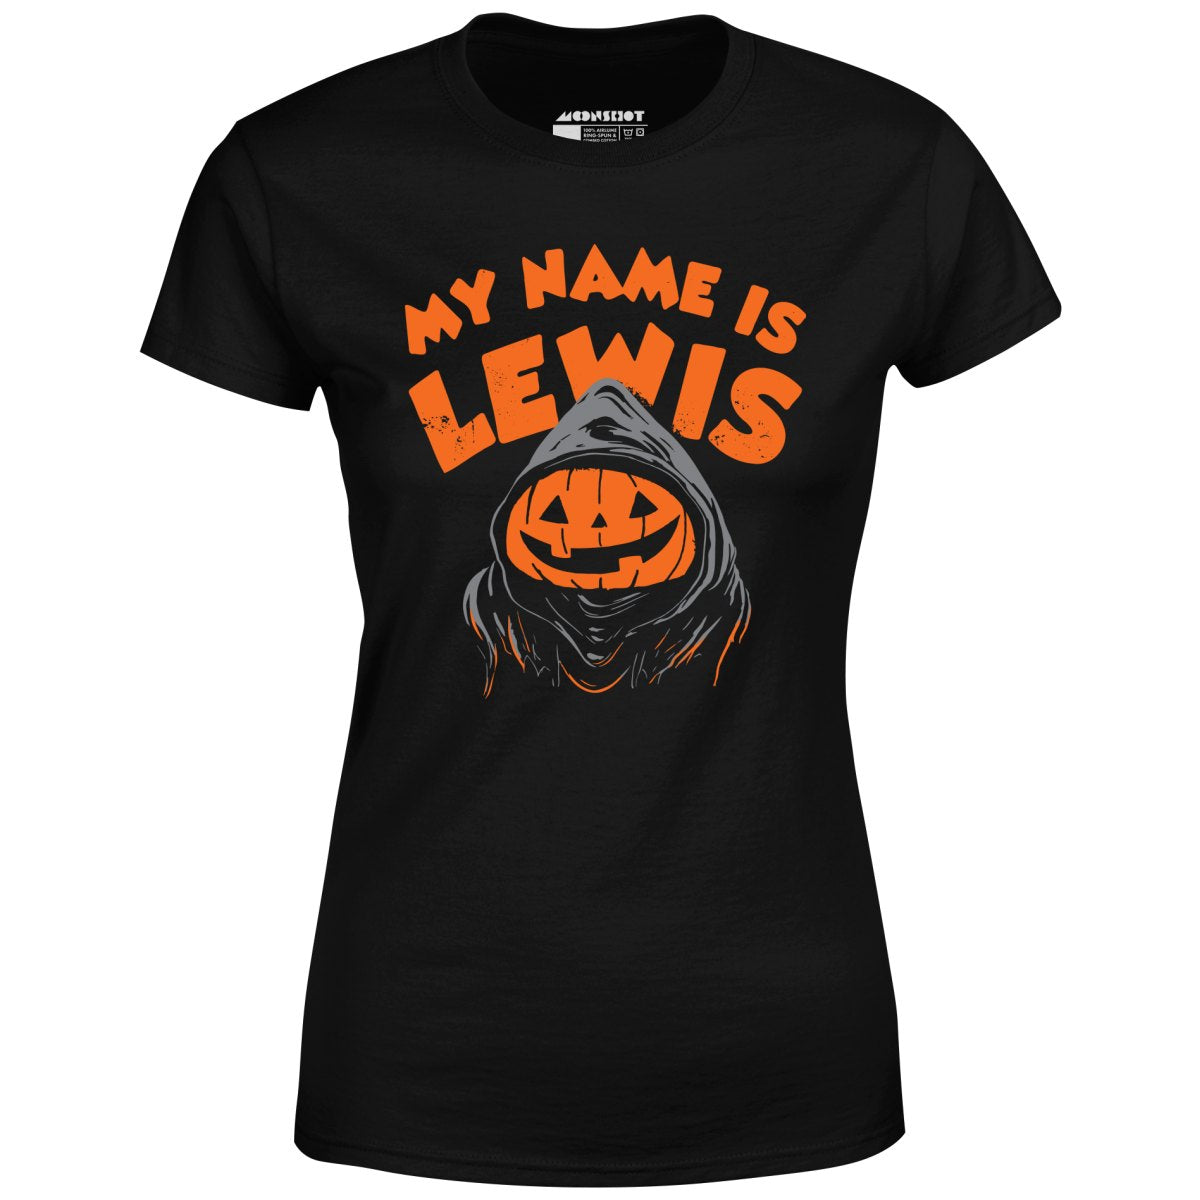 My Name is Lewis - Women's T-Shirt